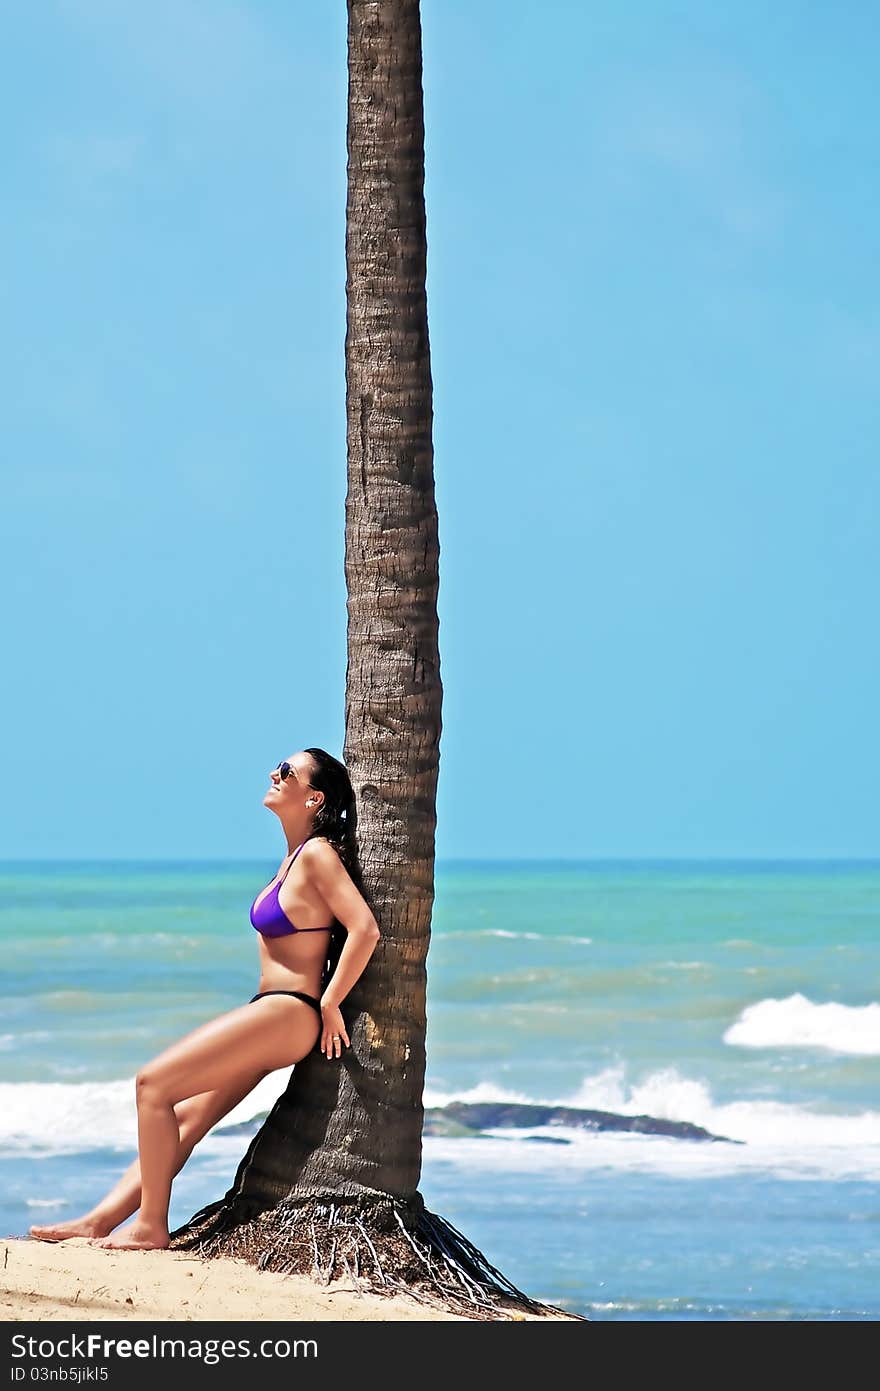 Woman standing by a palm tree at a paradisal tropical beach, in a perfect sunny day